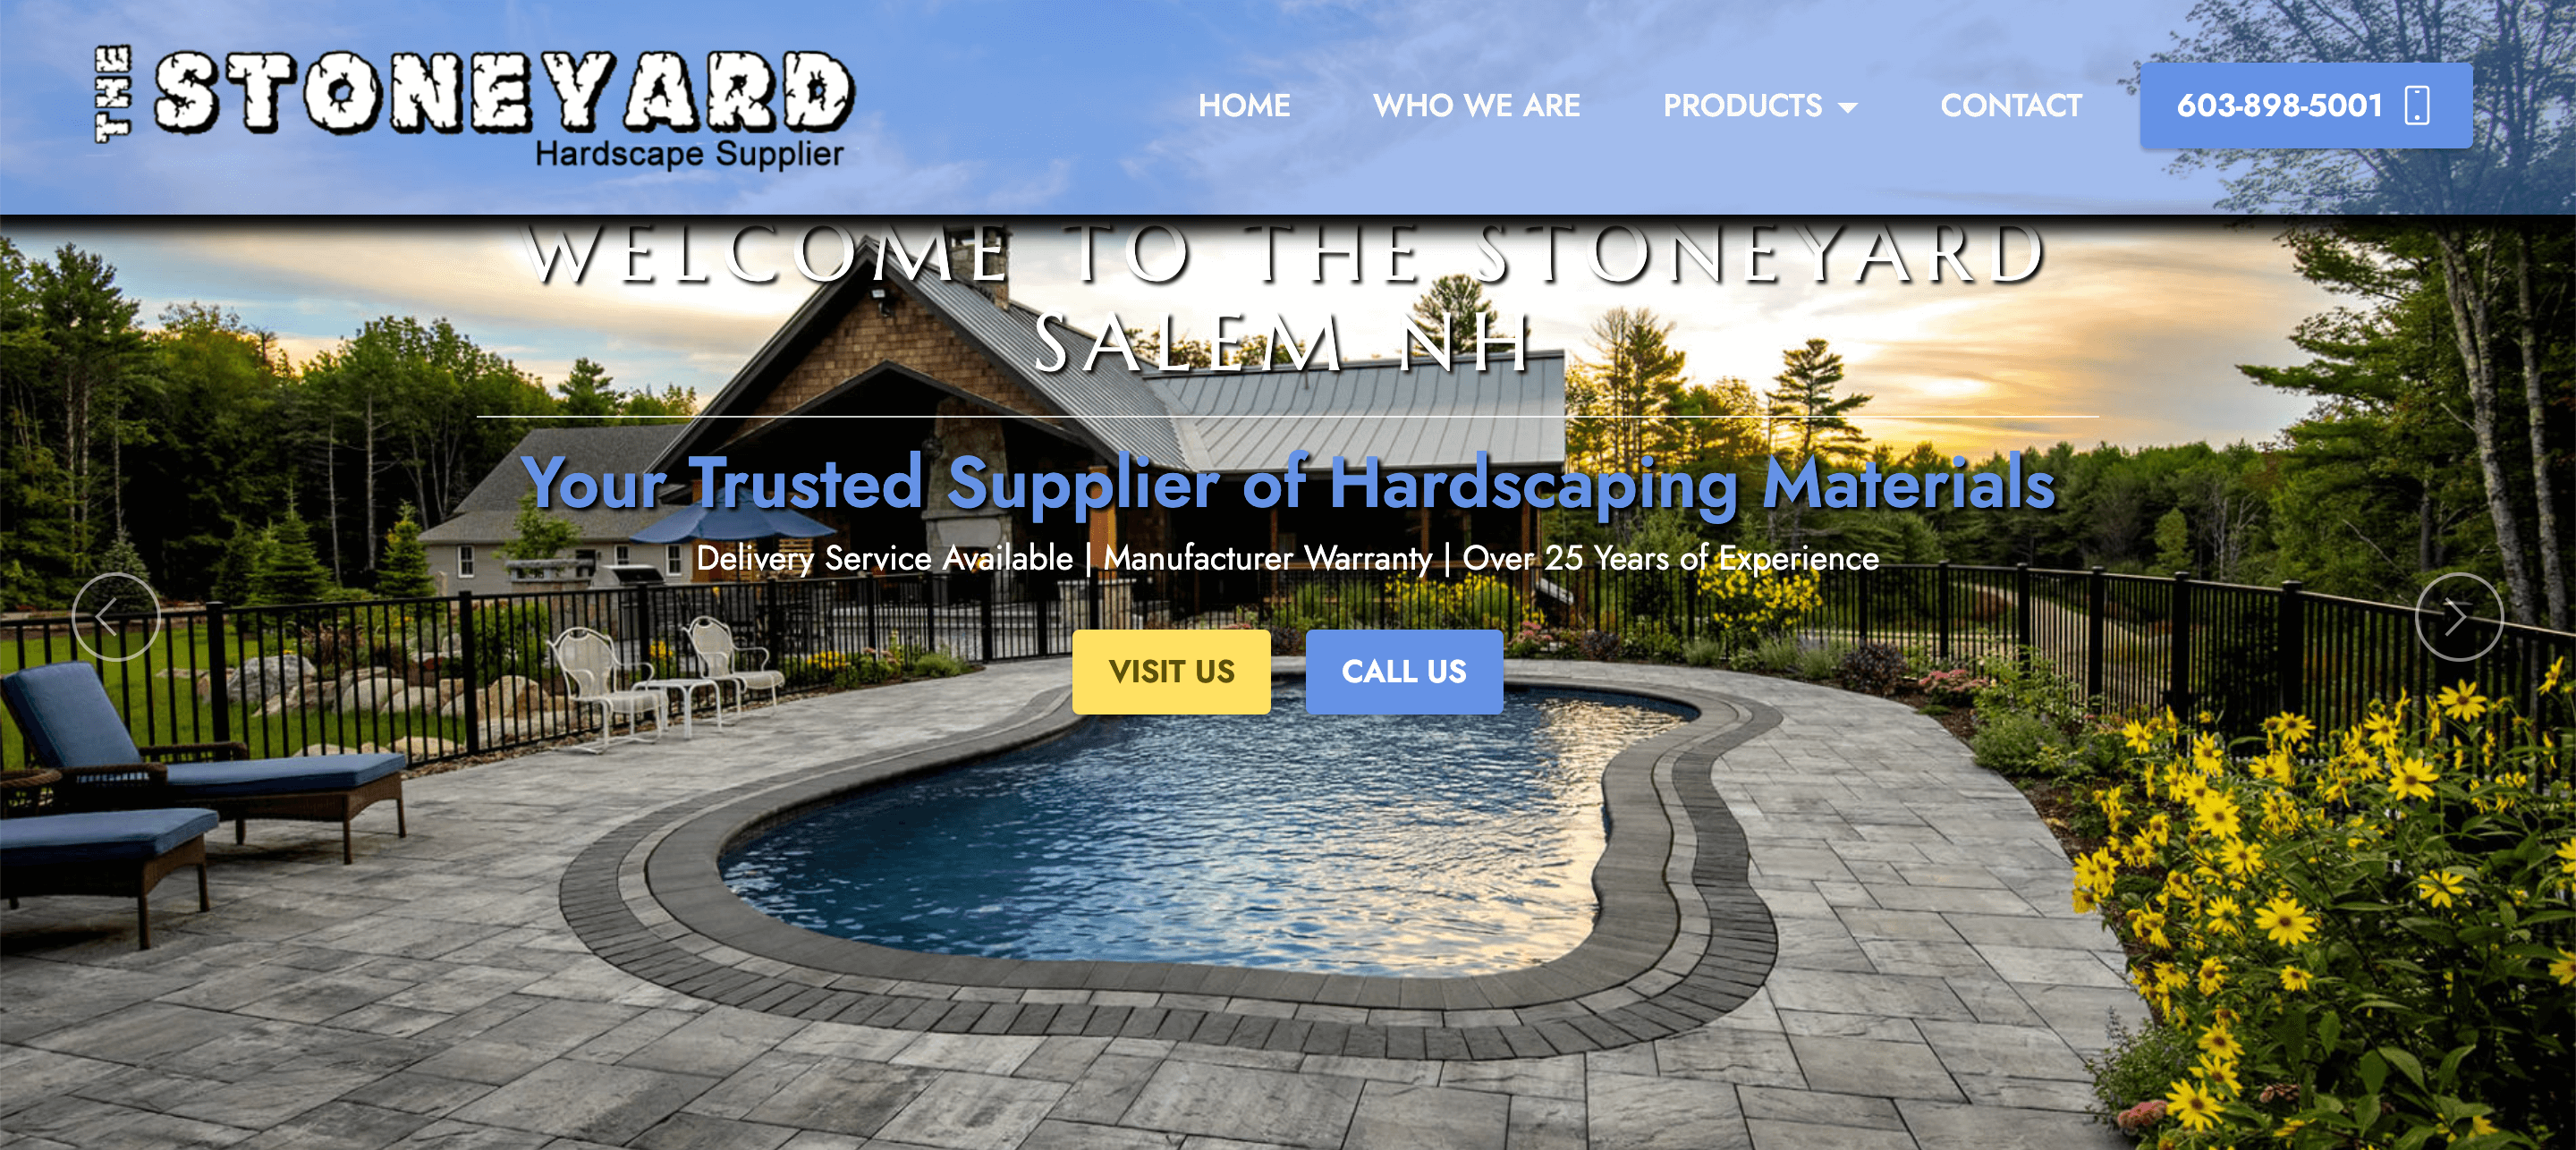 The Stoneyard website design showcasing a variety of local stone yards